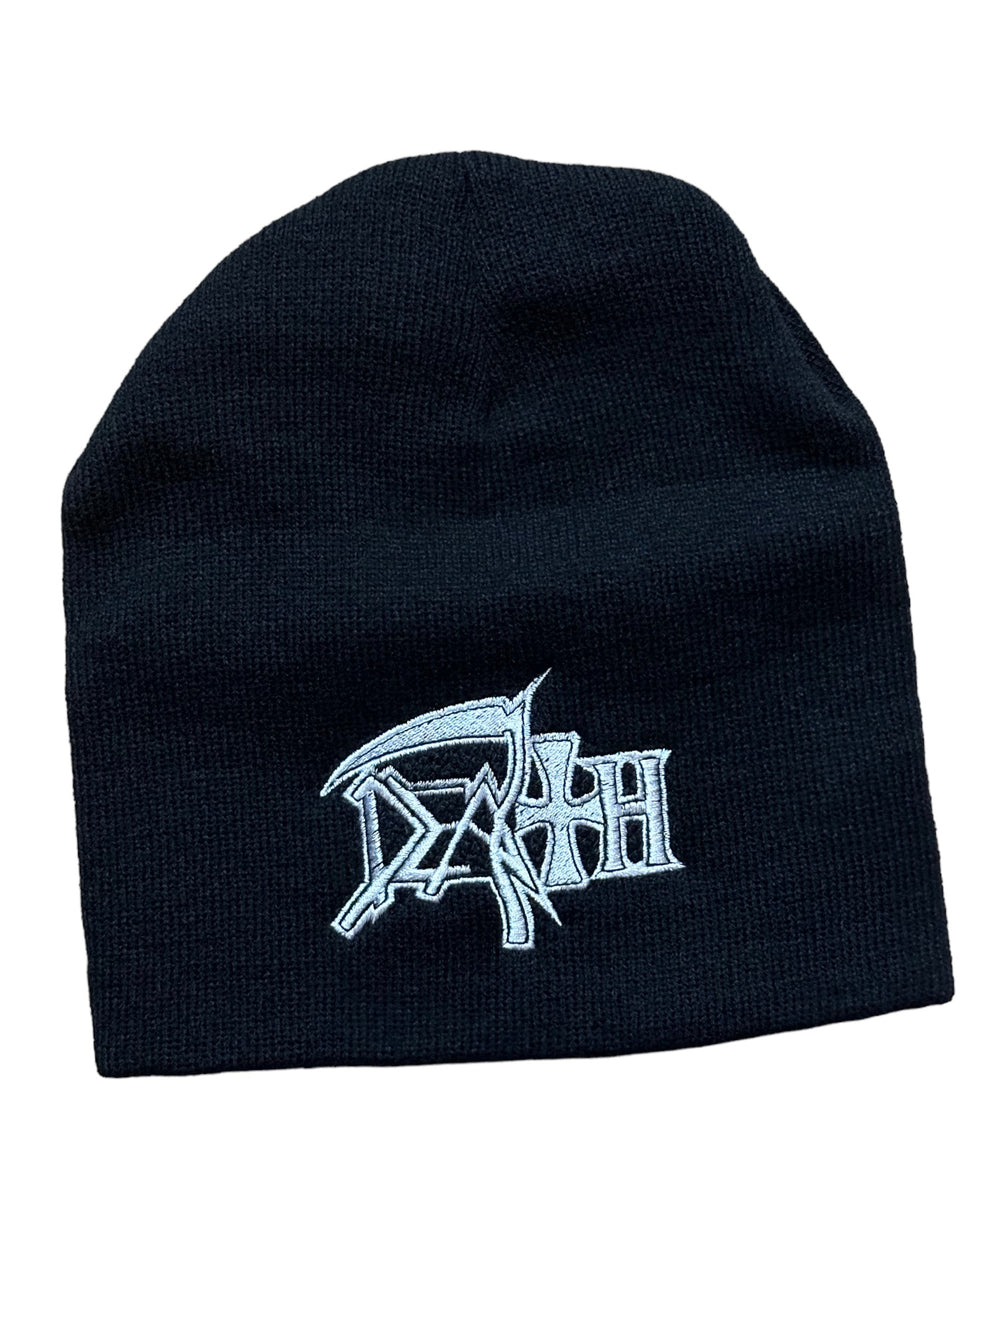 Death - Logo Embroidery Official Beanie Hat One Size Fits All NEW